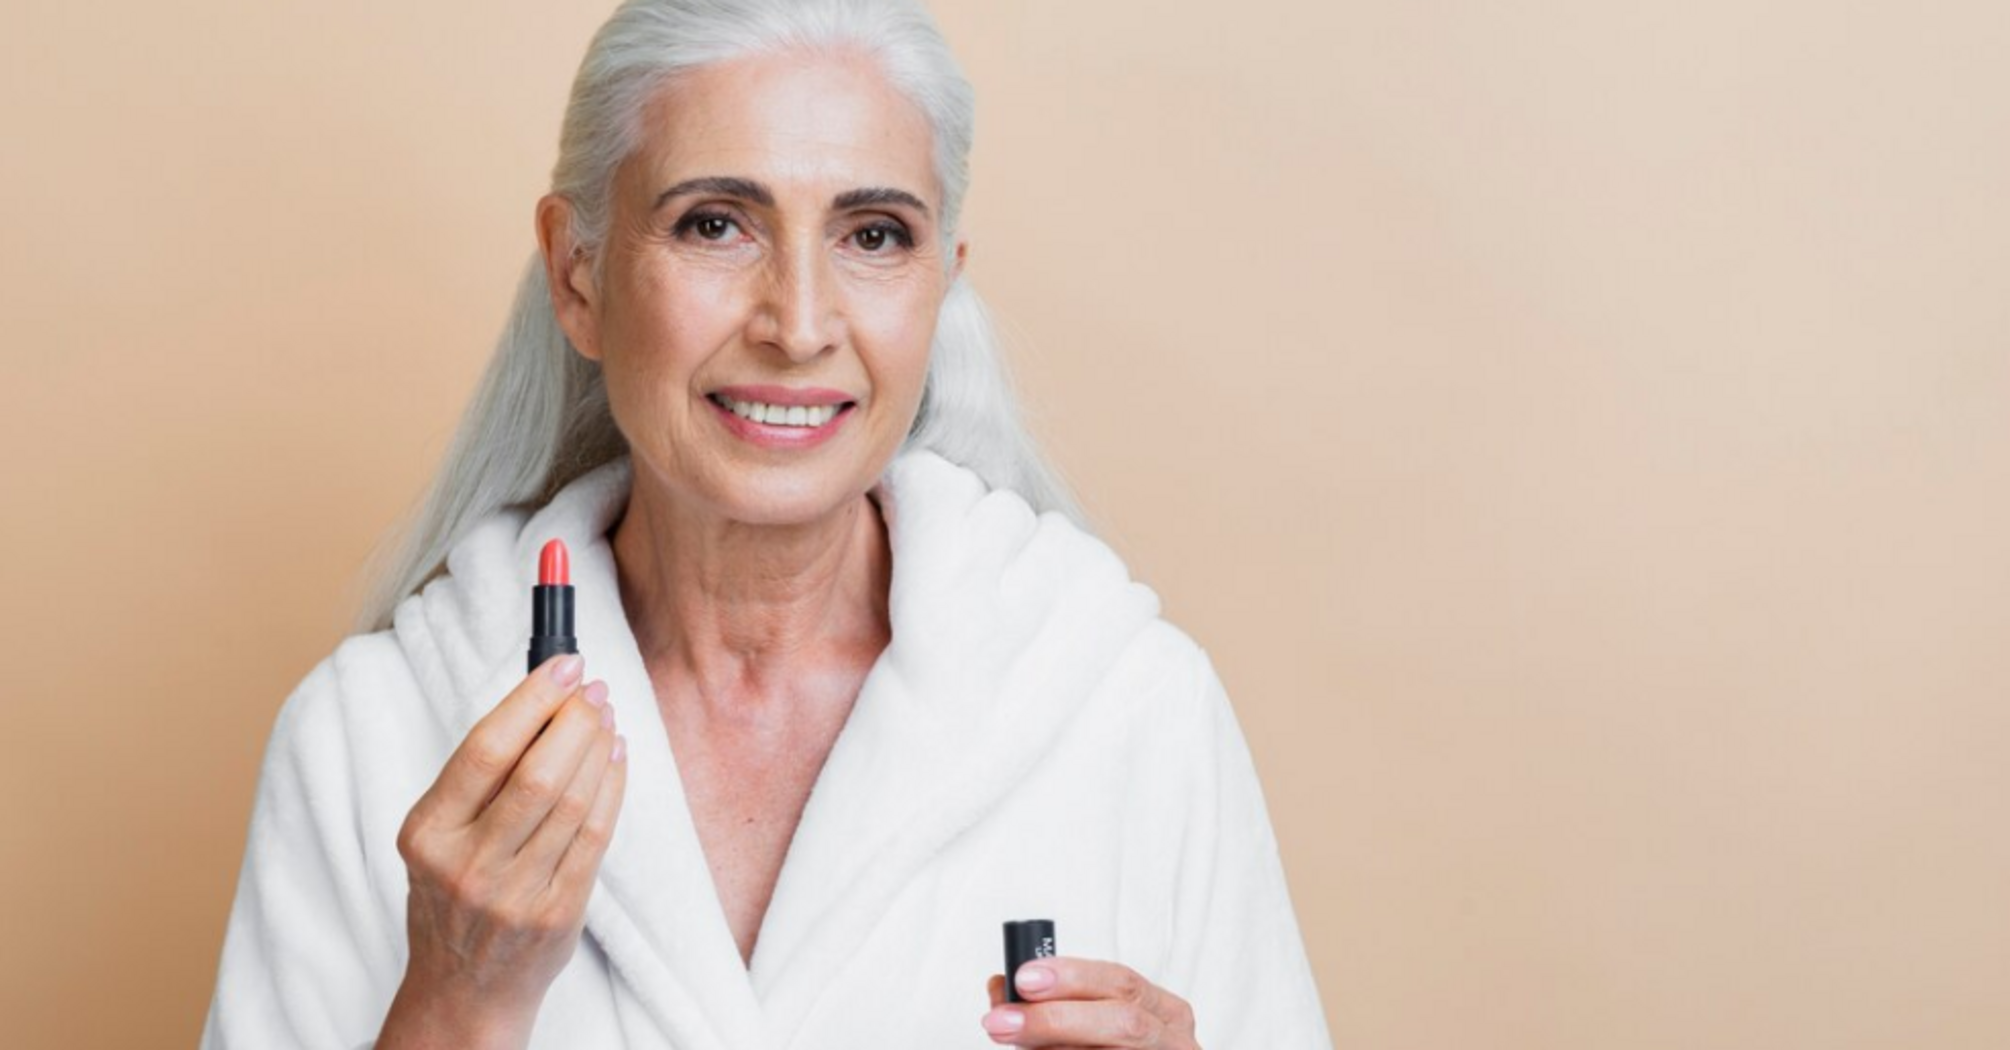 Never buy these shades: which lipstick does not match gray hair